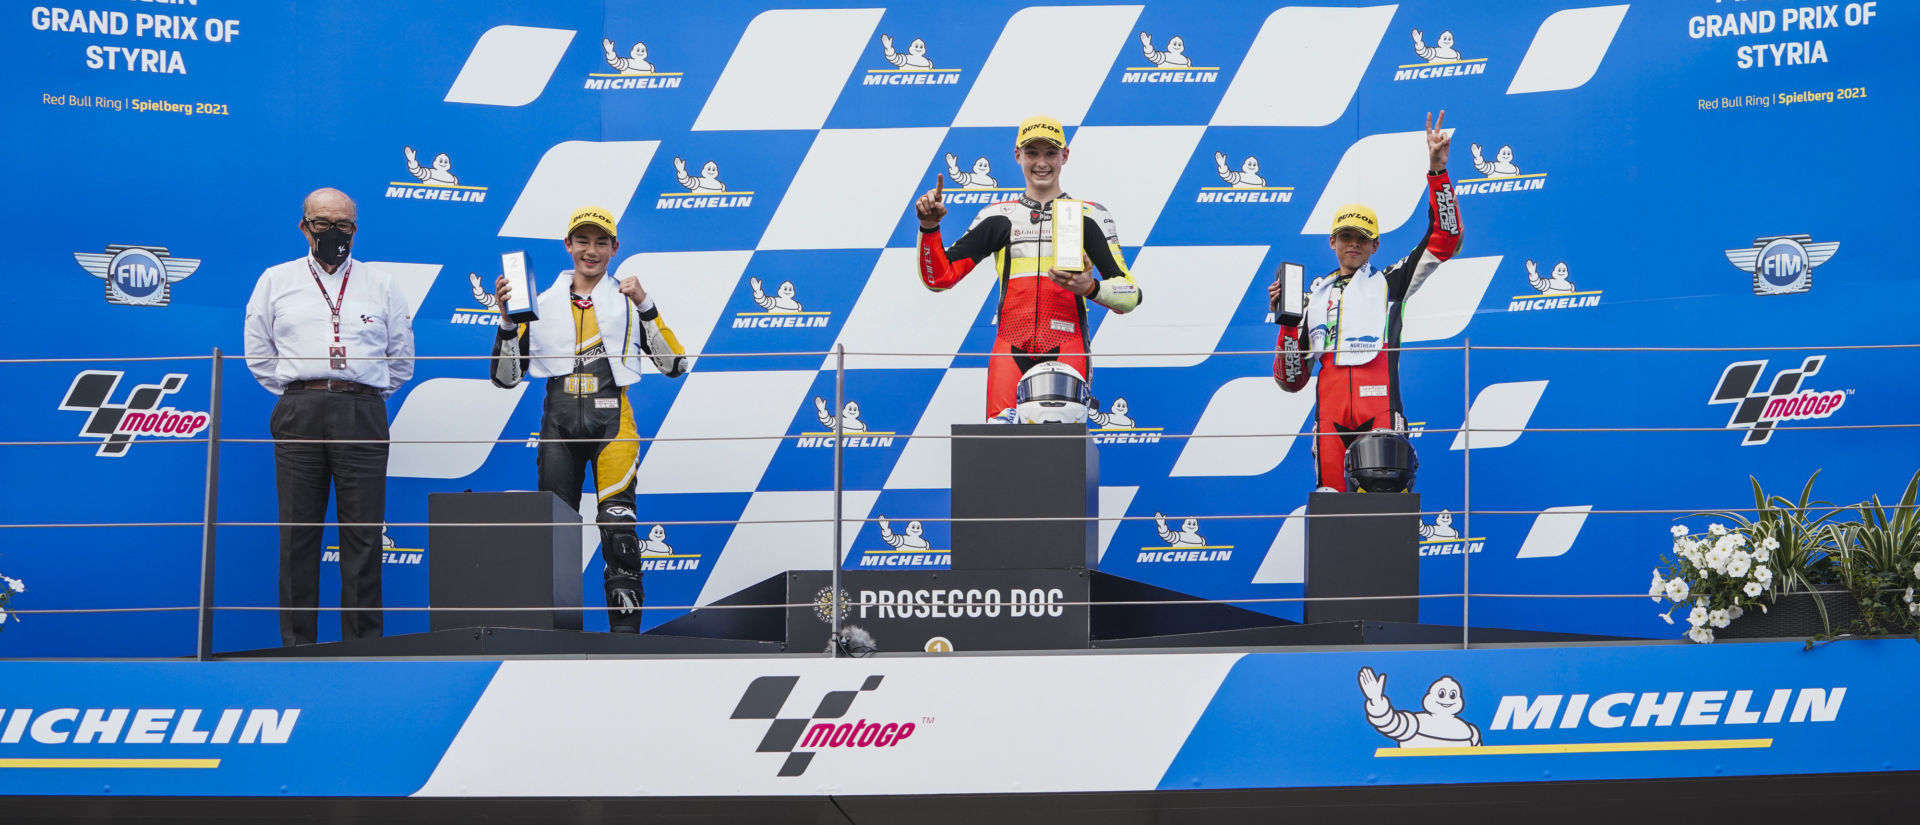 Hungarian-American Rossi Moor (center) on top of the Northern Talent Cup podium at Red Bull Ring. Moor is flanked by runner-up Lenoxx Phommara (left), third-place finisher Kevin Farkas (right), and Dorna CEO Carmelo Ezpeleta (far left). Photo courtesy Dorna.